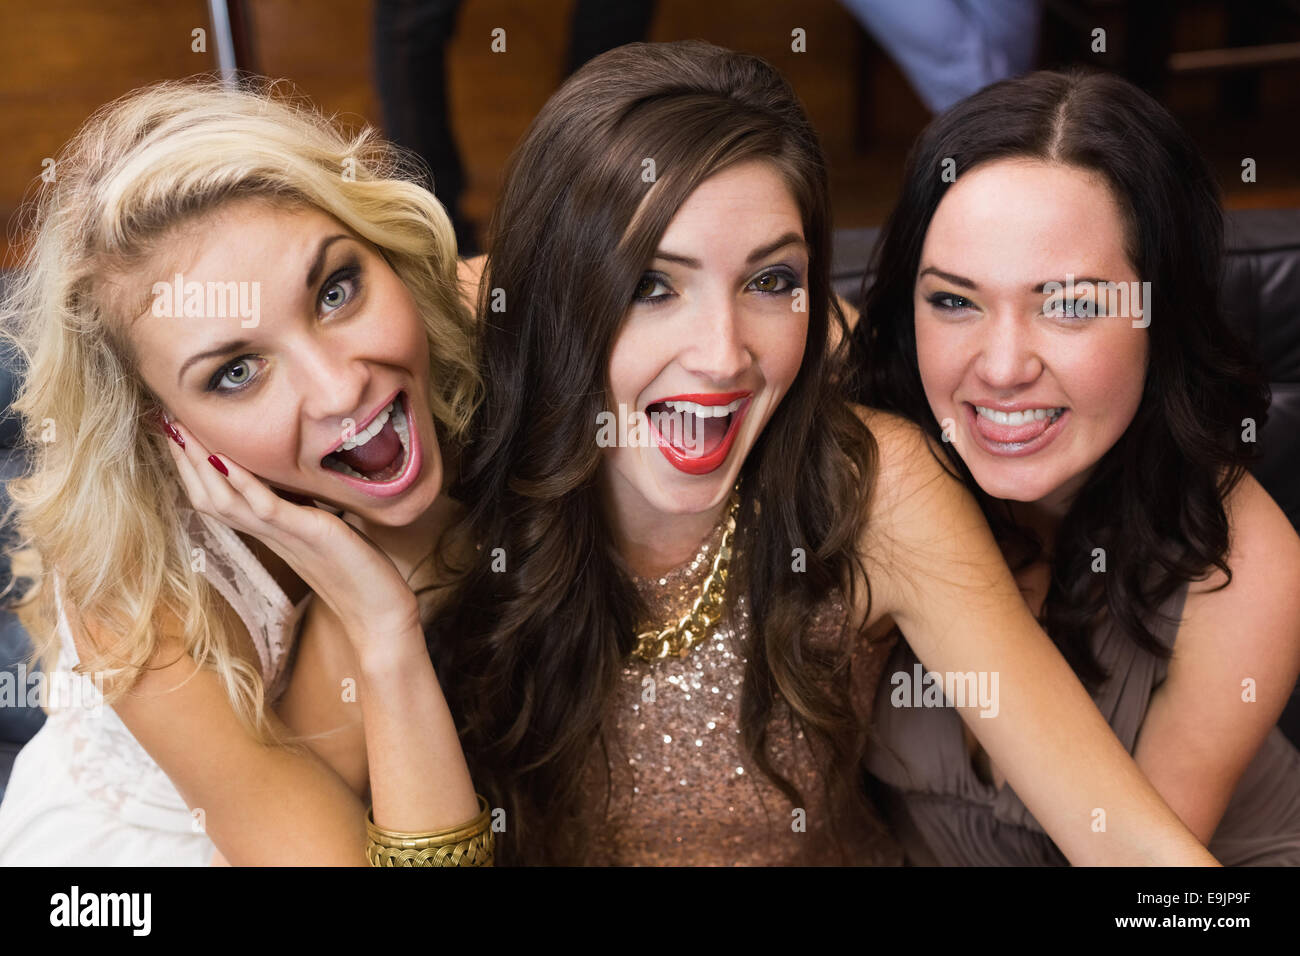 Happy friends making silly faces Stock Photo